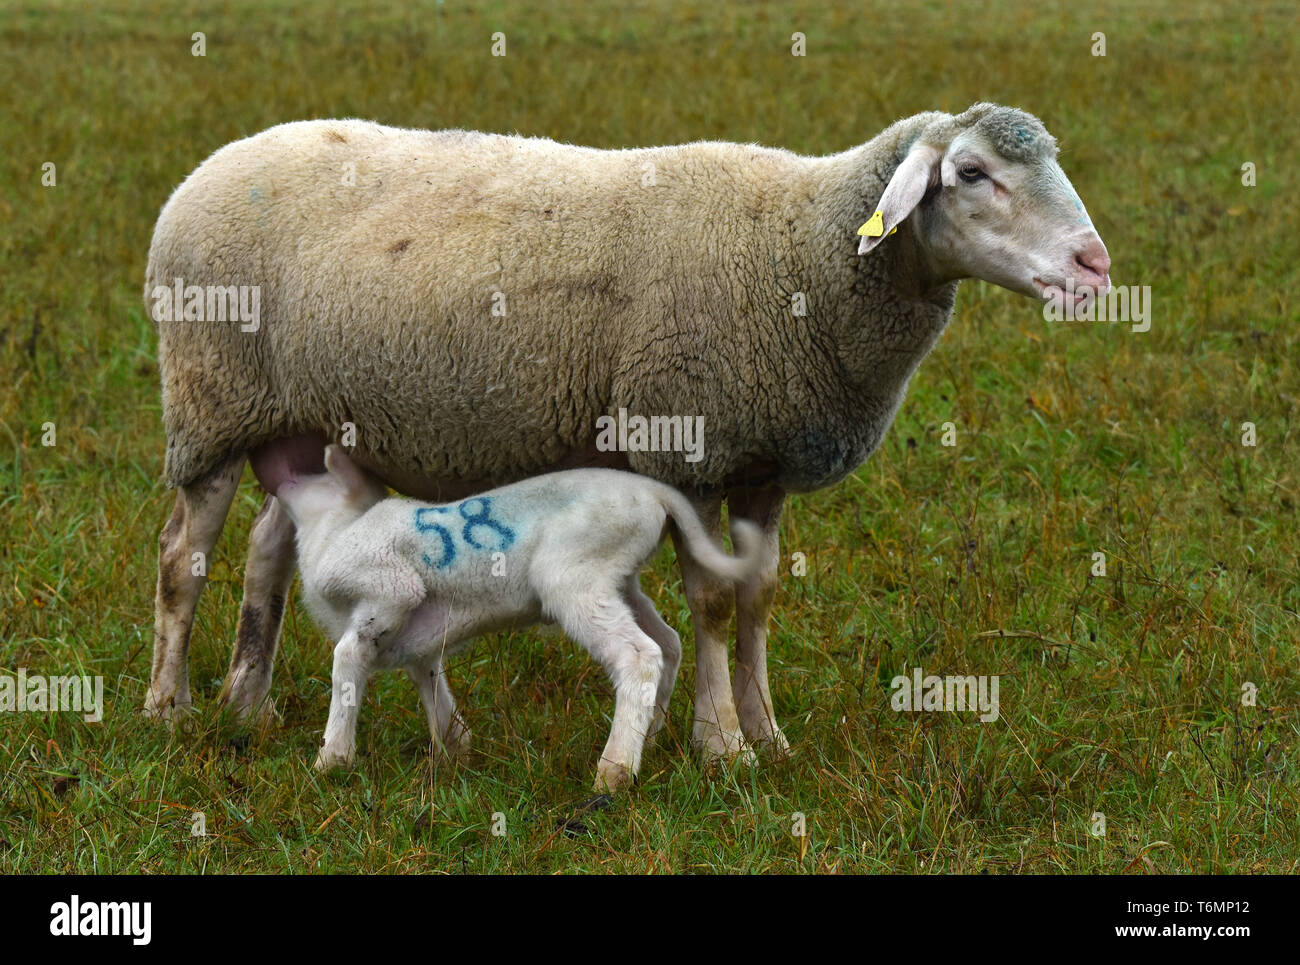 Sheep with lamb, suckle, lactate, breastfeed, Stock Photo